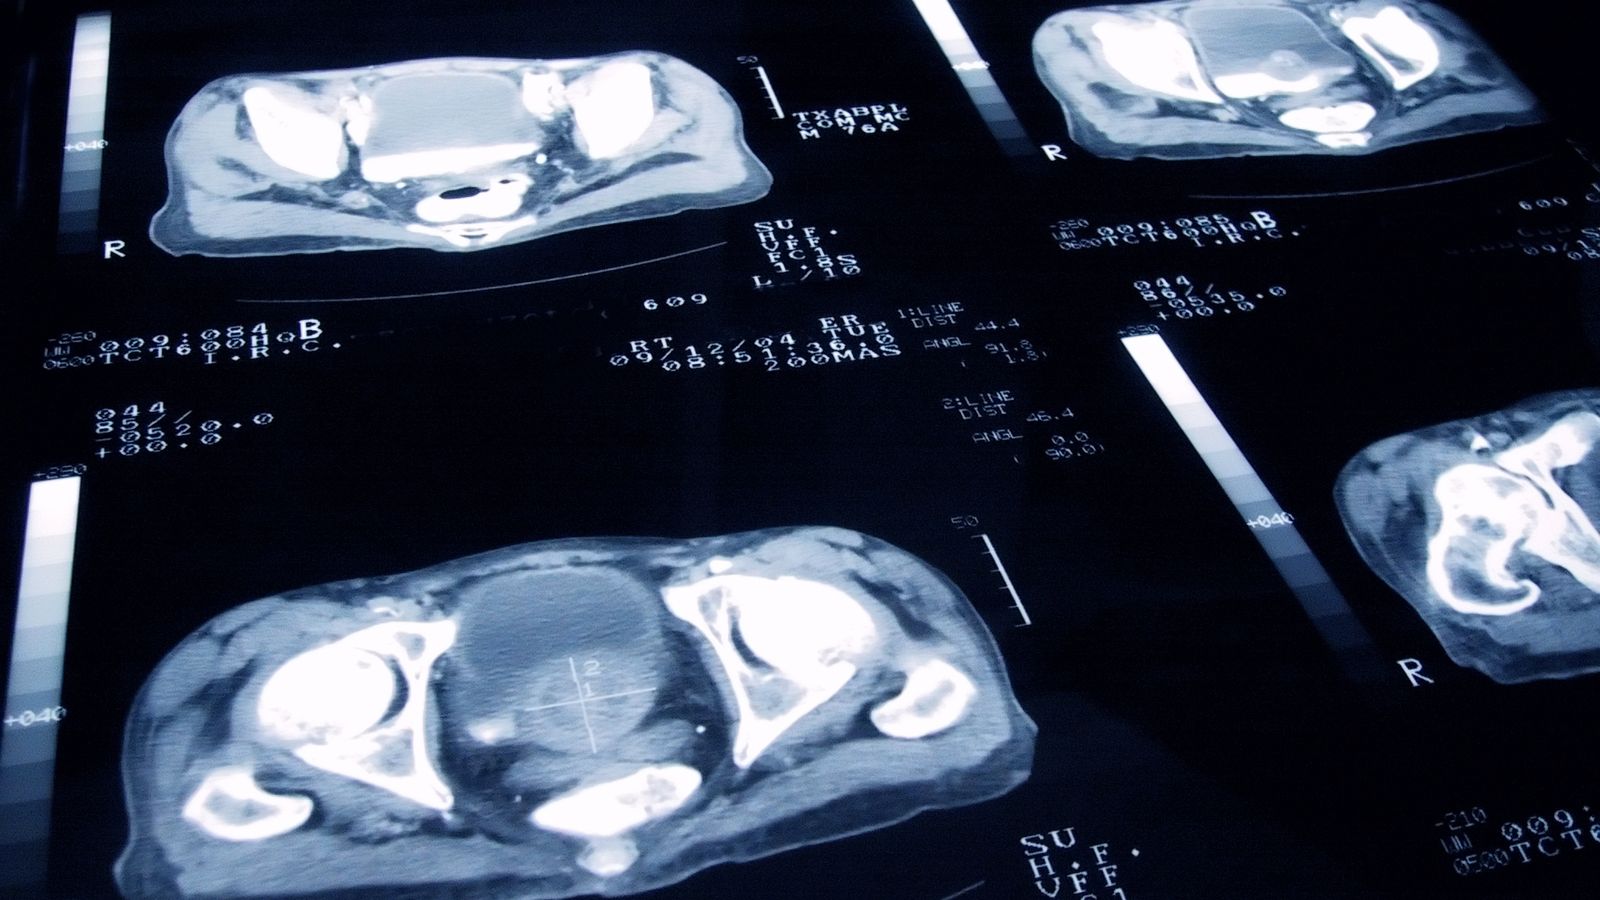 Prostate cancer: Deaths could be 'significantly reduced' by using MRI scans instead of PSA tests, study suggests